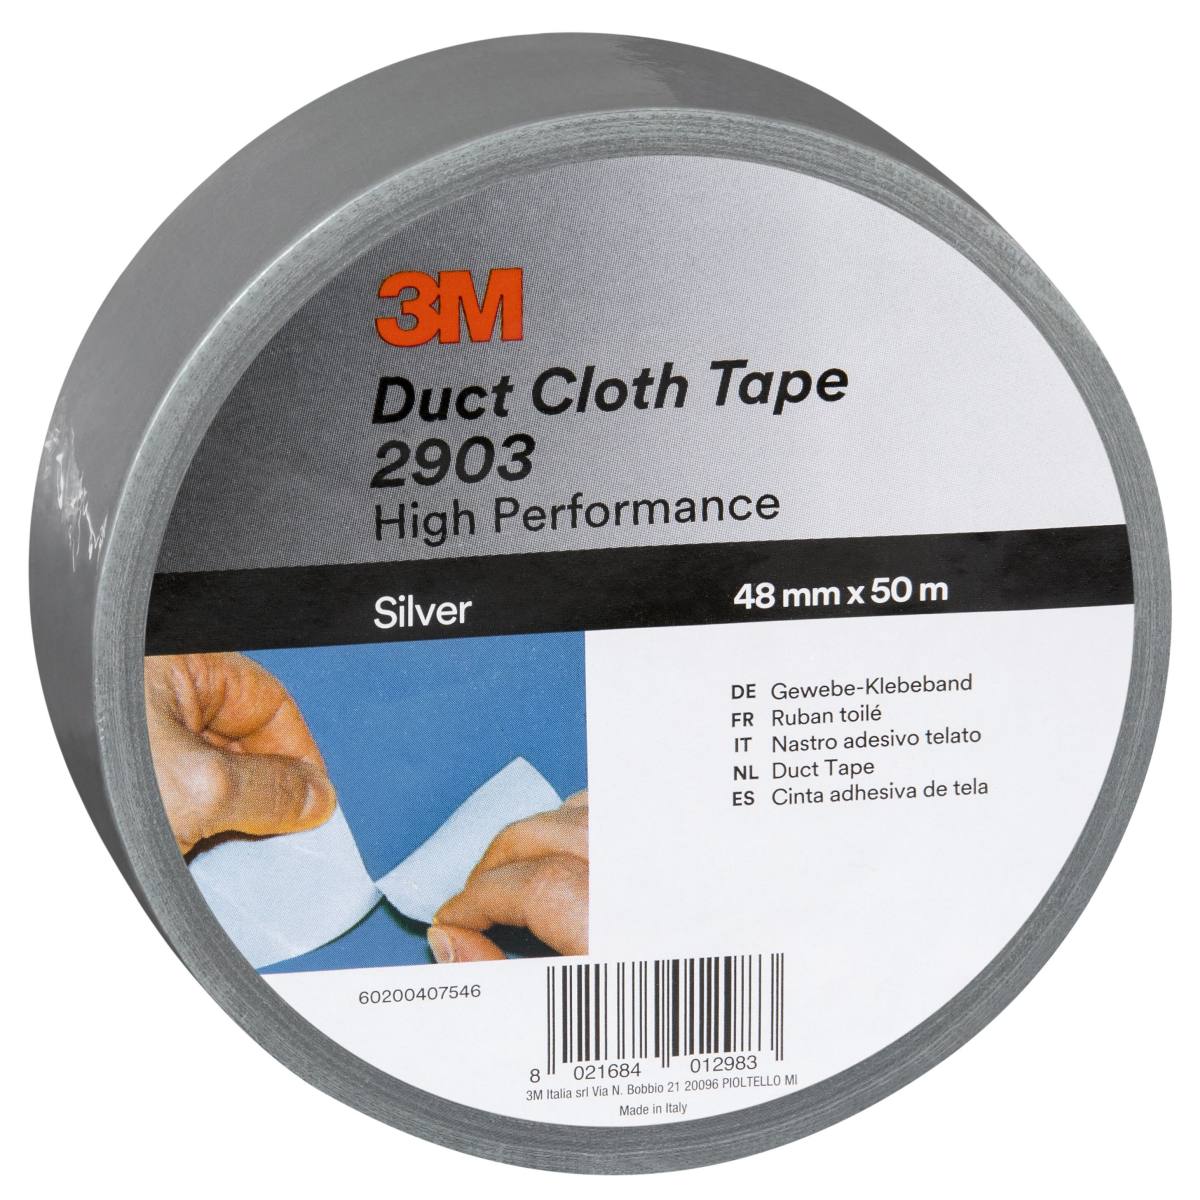 3M Fabric adhesive tape 2903, silver, 48mm x 50m, 0.15mm